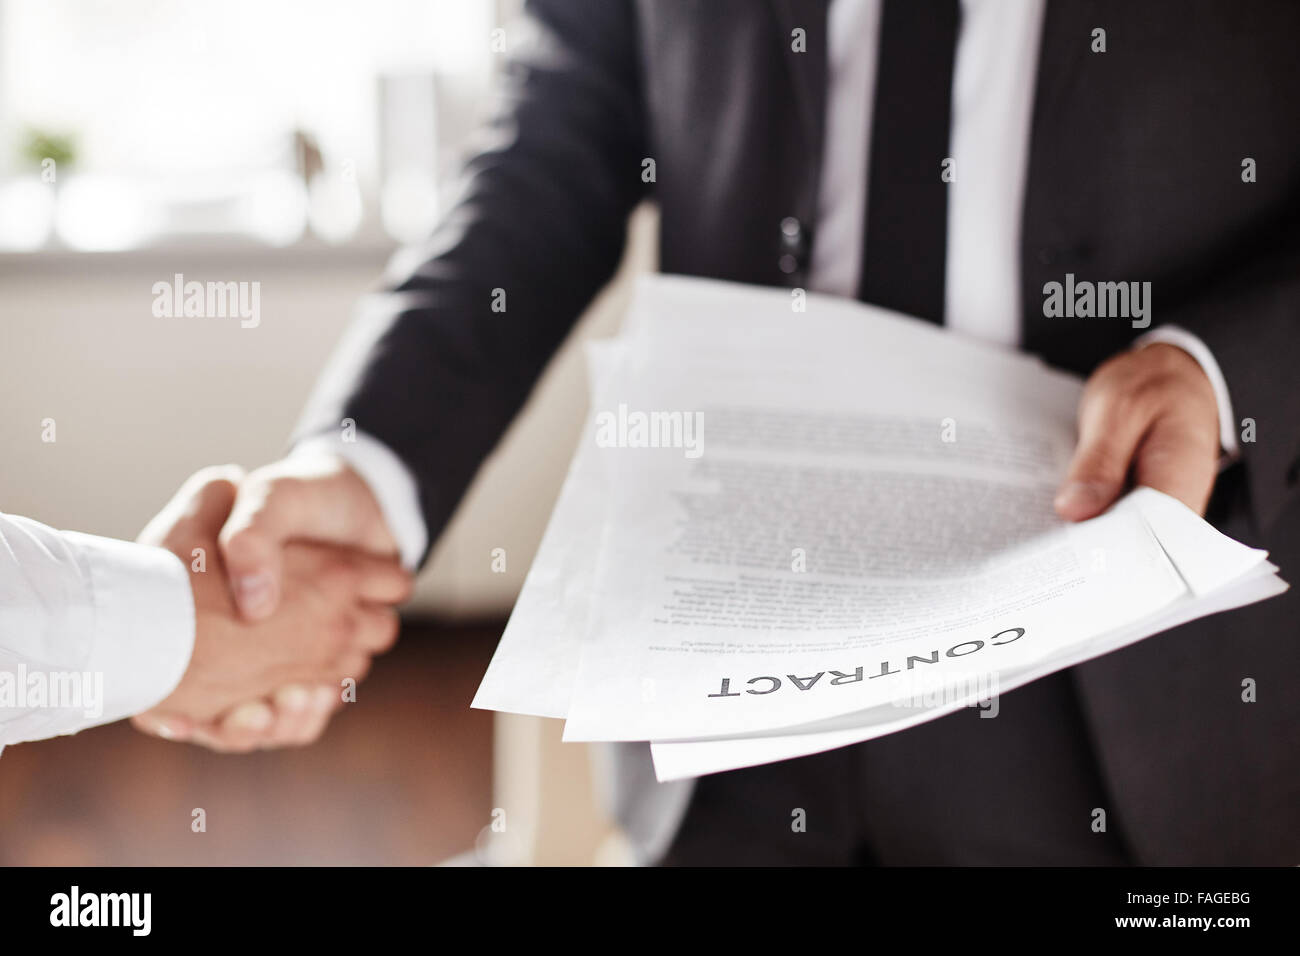 Business contract held by businessman during handshake with partner Stock Photo